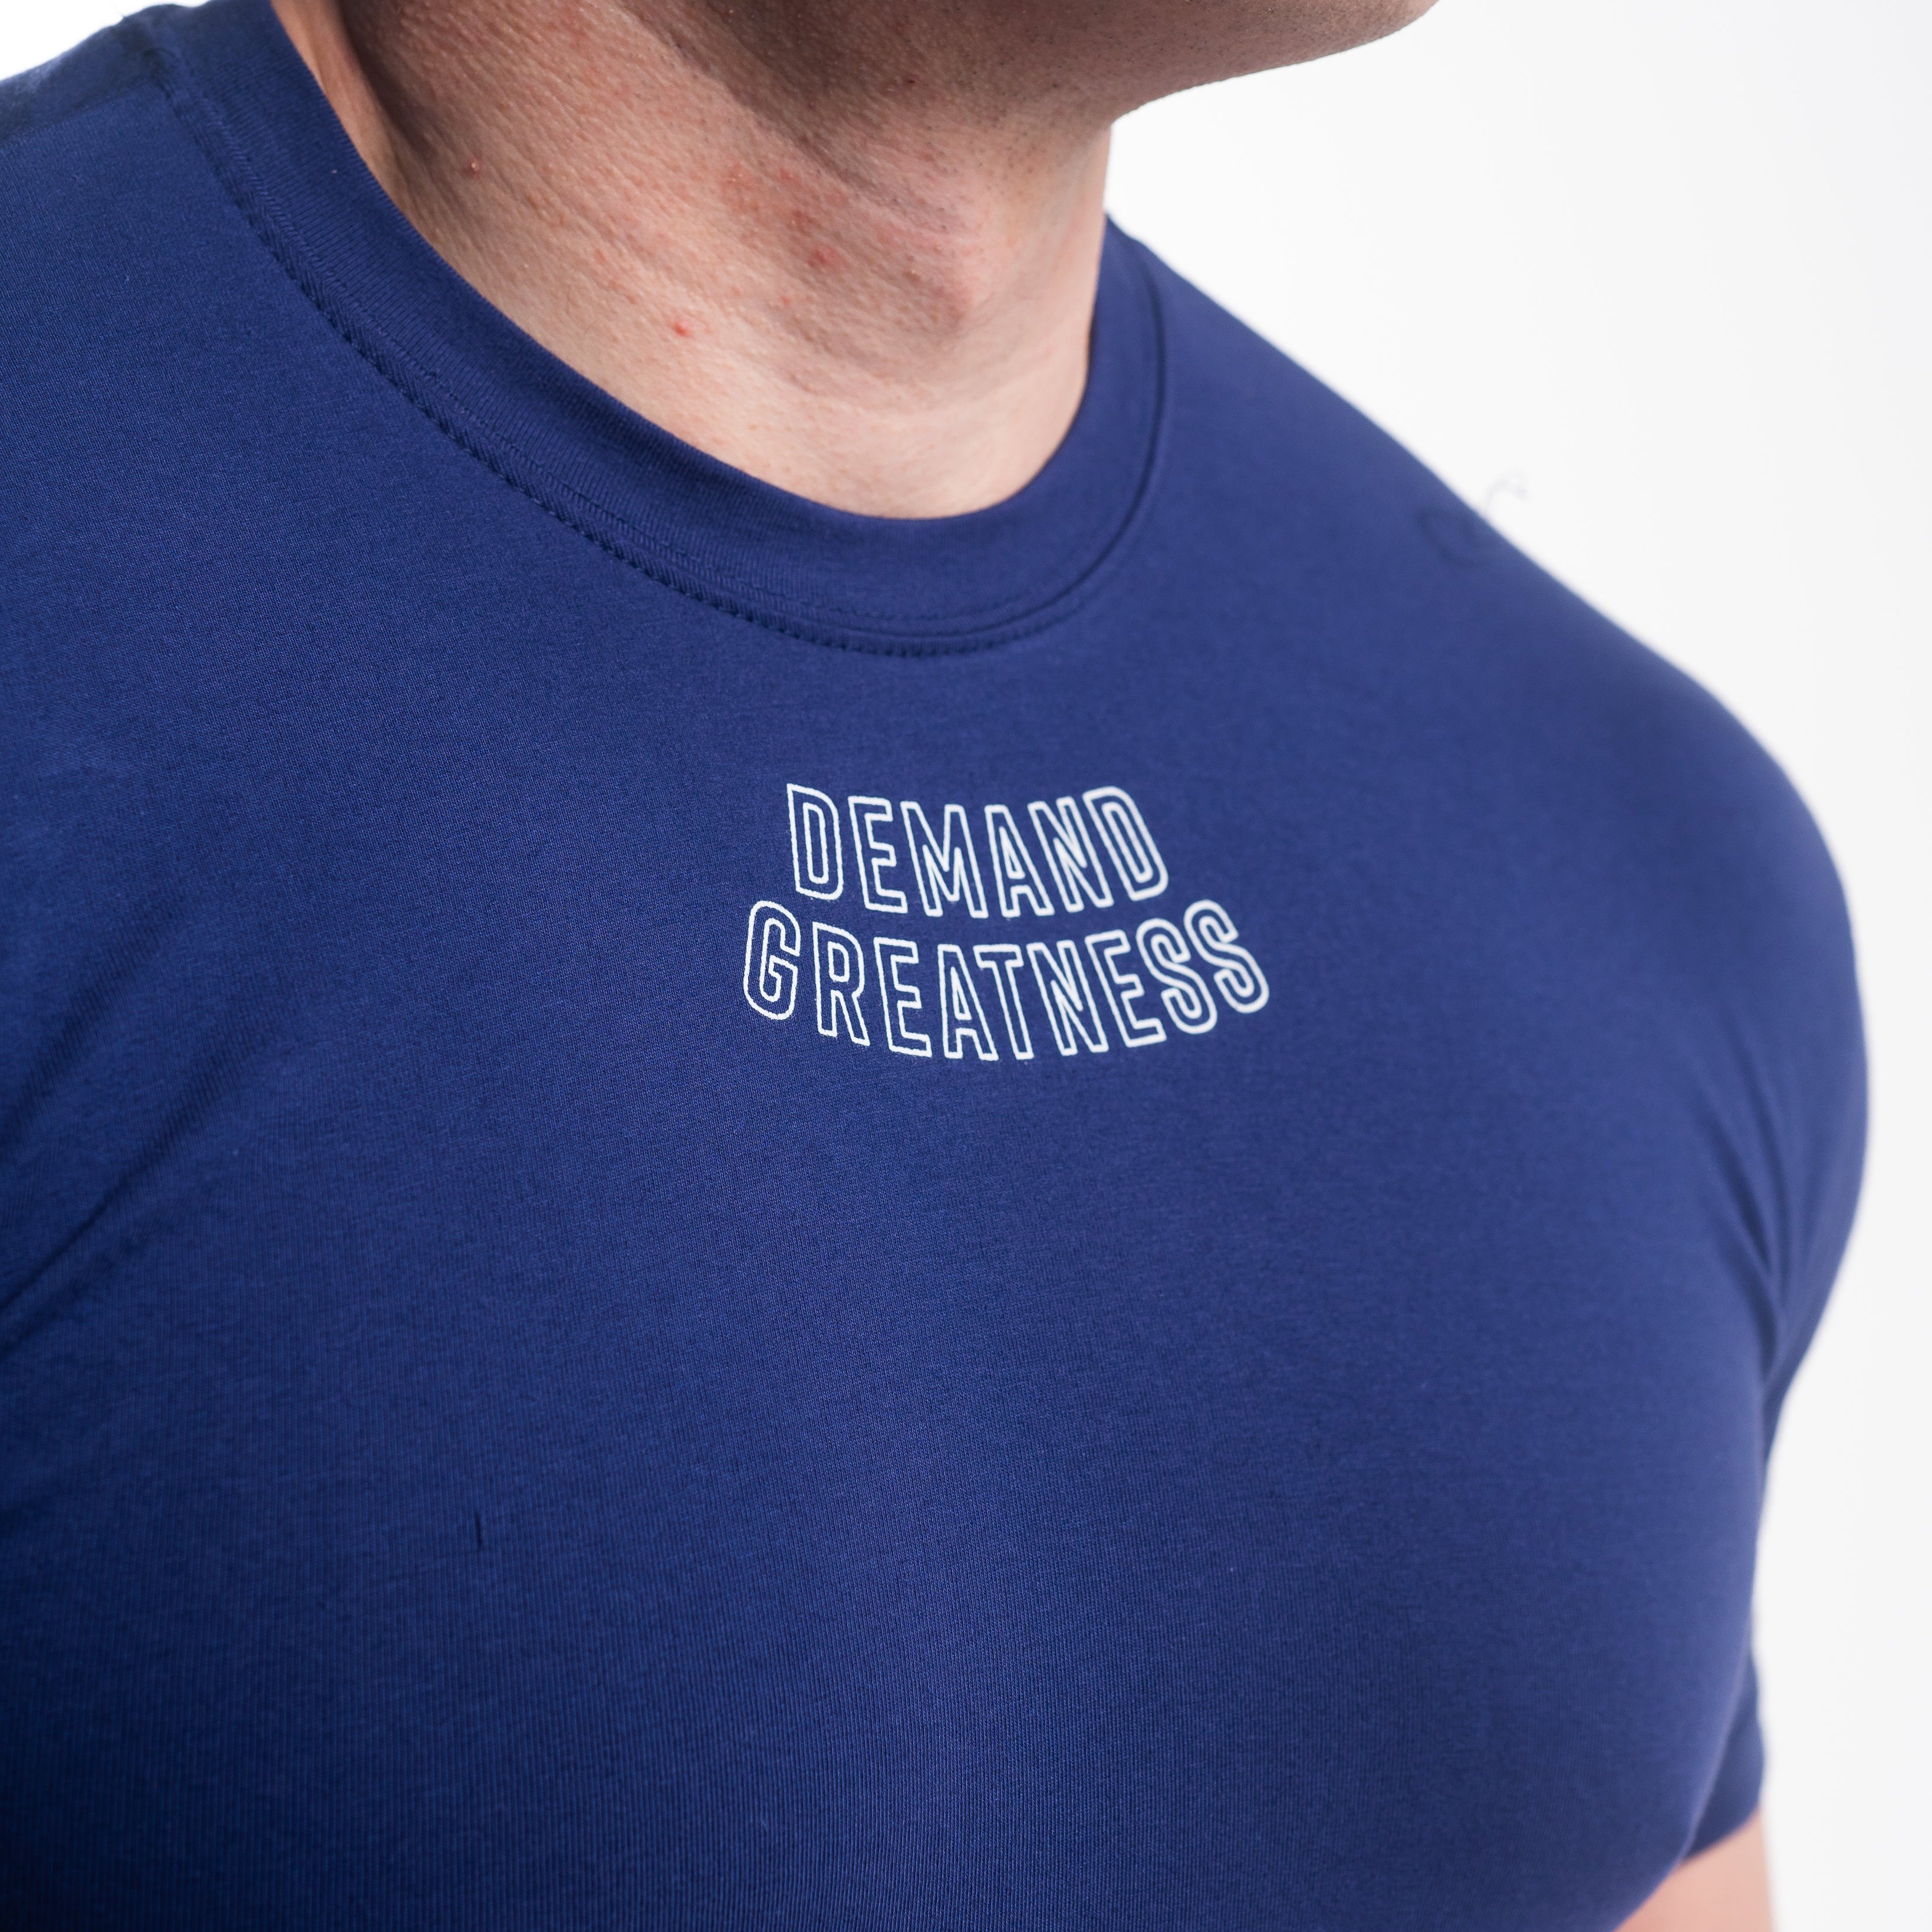 DG23 Night Light is our new meet shirt design highlighting Demand Greatness with a double outline font to showcase your impact on the platform. The DG23 Meet Shirt is IPF Approved. Shop the full A7 Powerlifting IPF Approved Equipment collection. The IPF Approved Kit includes Powerlifting Singlet, A7 Meet Shirt, A7 Zebra Wrist Wraps, A7 Deadlift Socks, Hourglass Knee Sleeves (Stiff Knee Sleeves and Rigor Mortis Knee Sleeves). All A7 Powerlifting Equipment shipping to UK, Norway, Switzerland and Iceland.